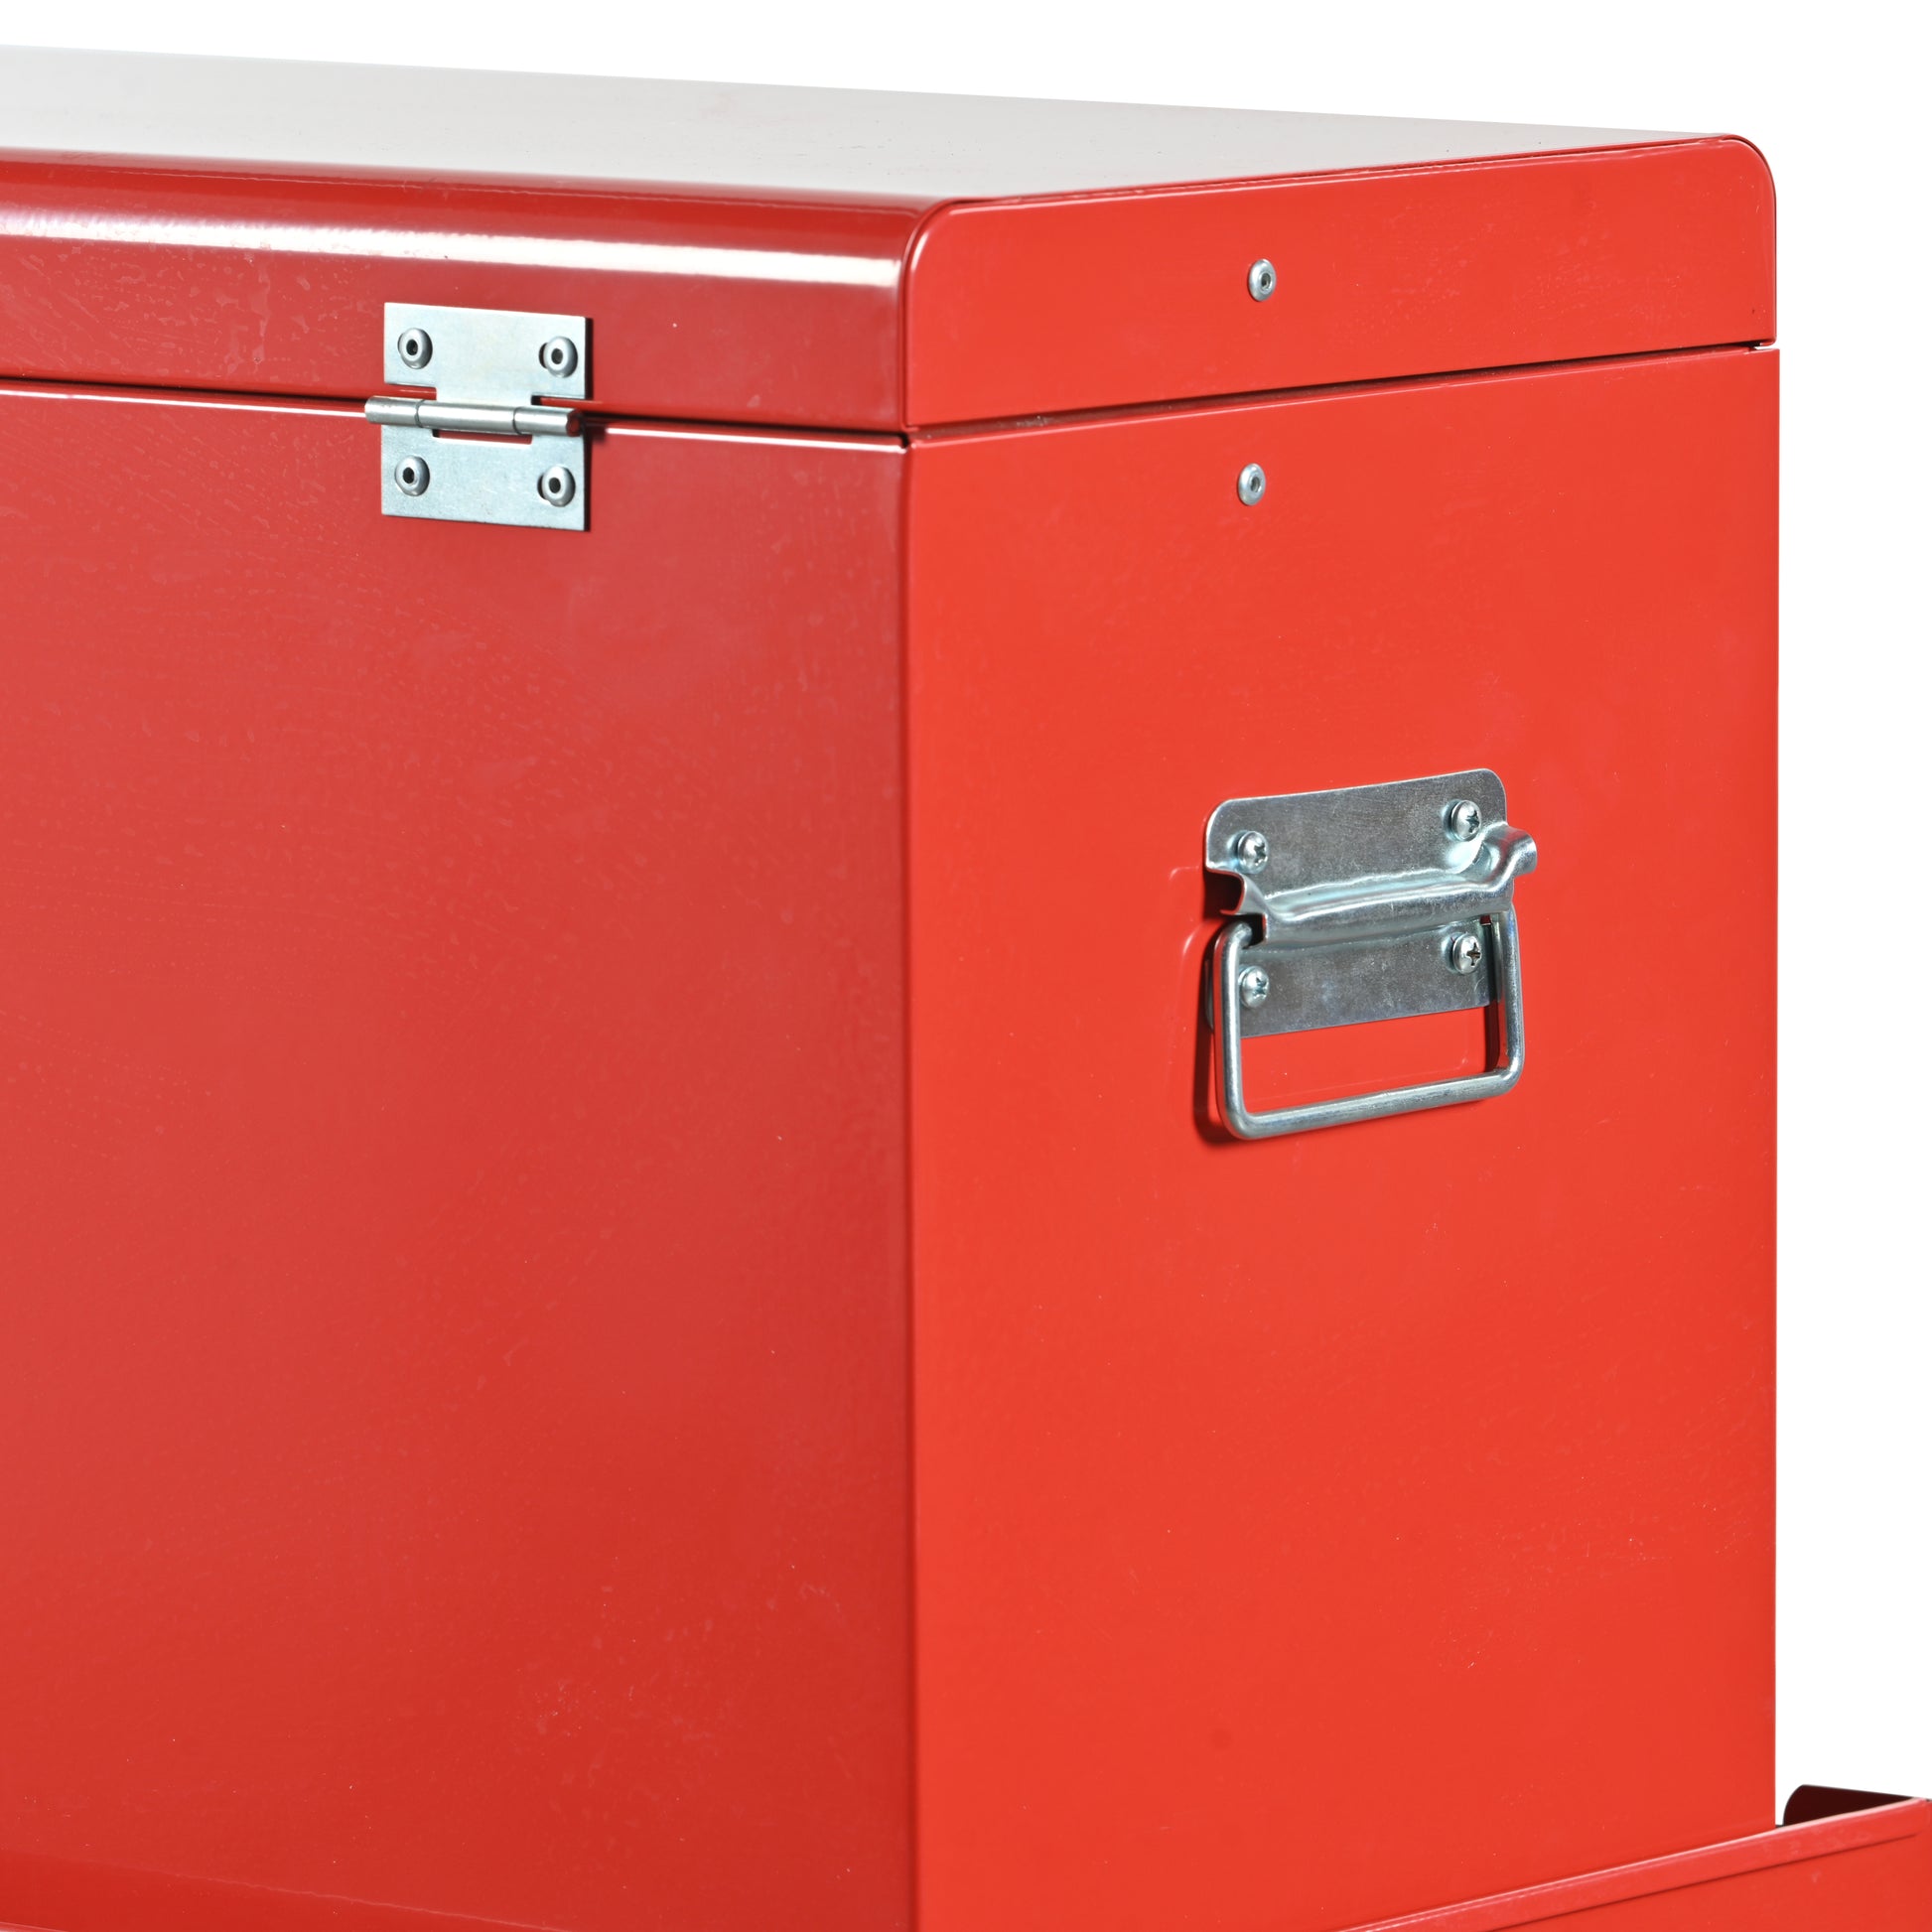 Detachable Large Tool Cabinet With Wheels, 5